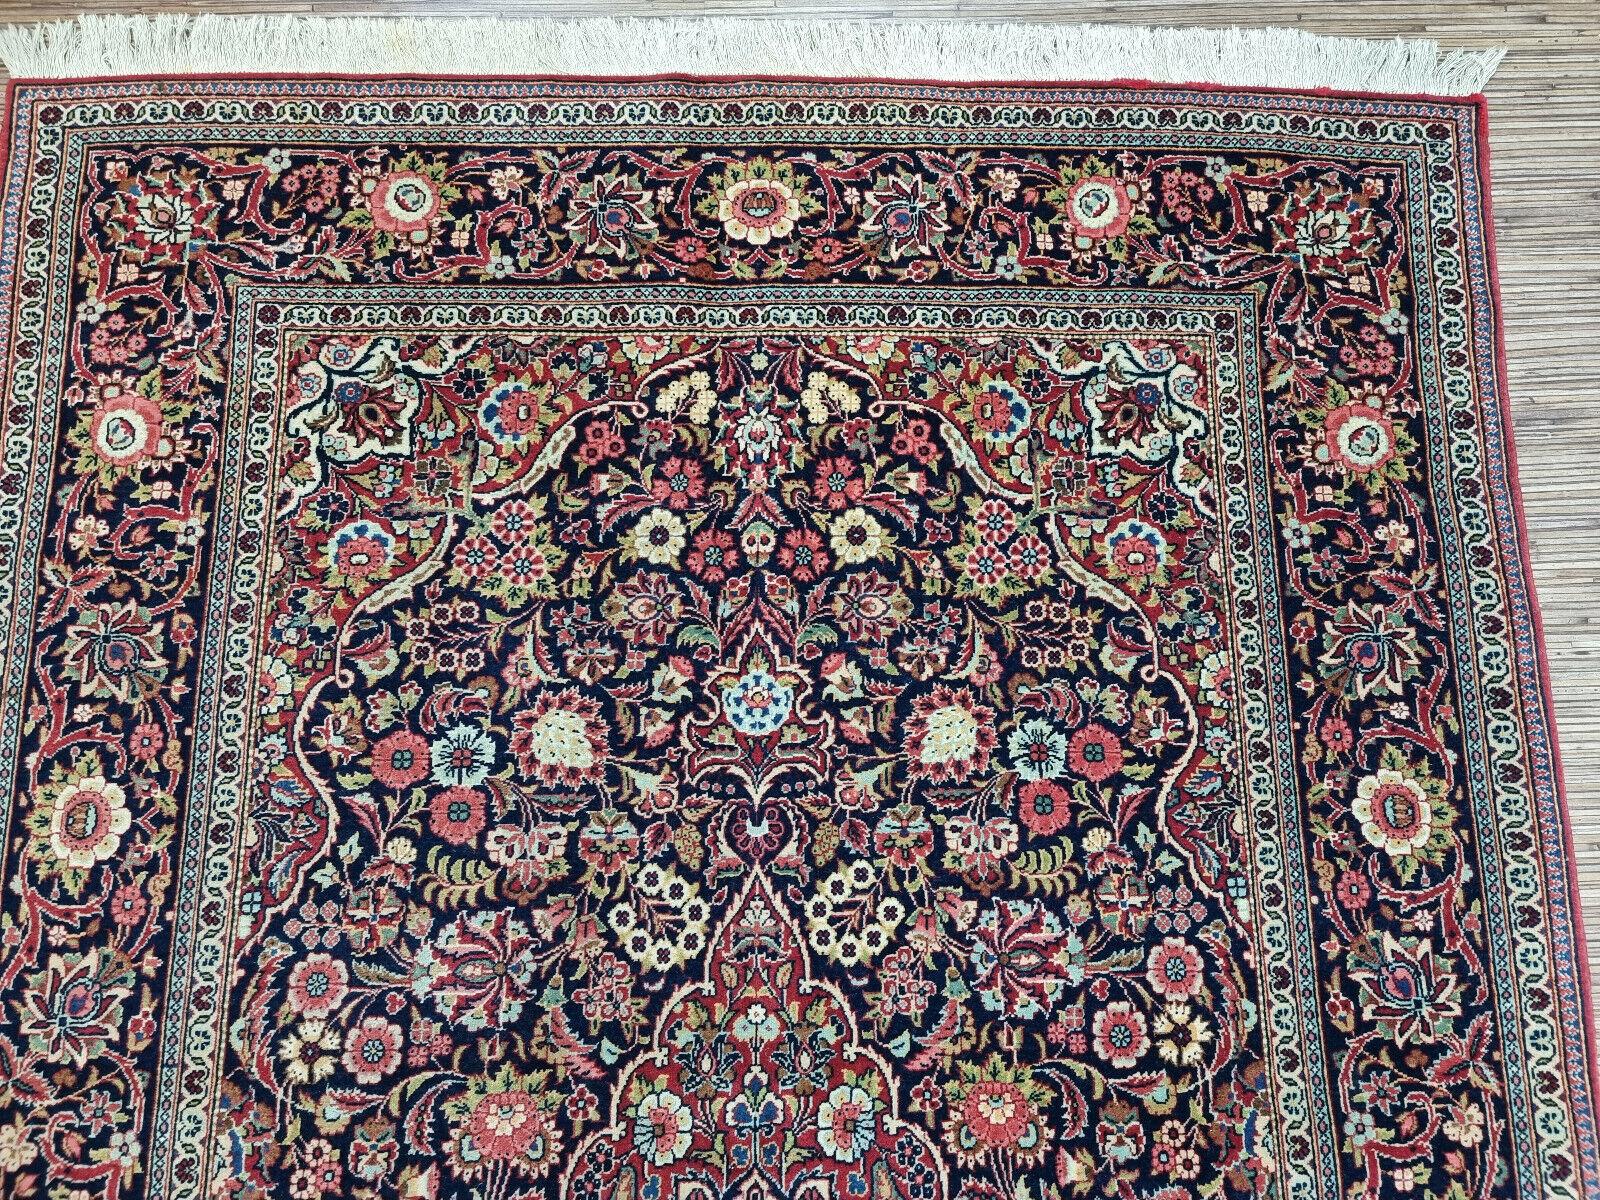 Early 20th Century Handmade Antique Persian Style Kashan Rug 4.3' x 6.6', 1920s - 1D77 For Sale